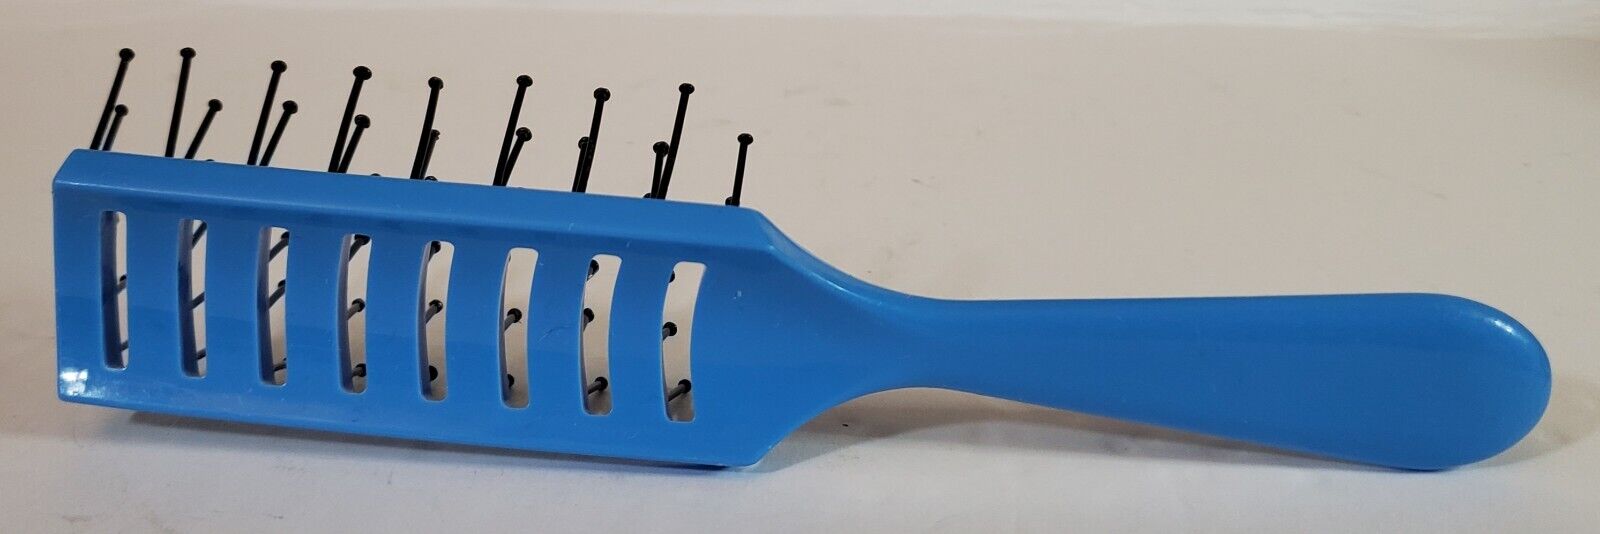 Vintage Goody Vented Styling Brush Blue Hair Comb USA MADE 80s | eBay